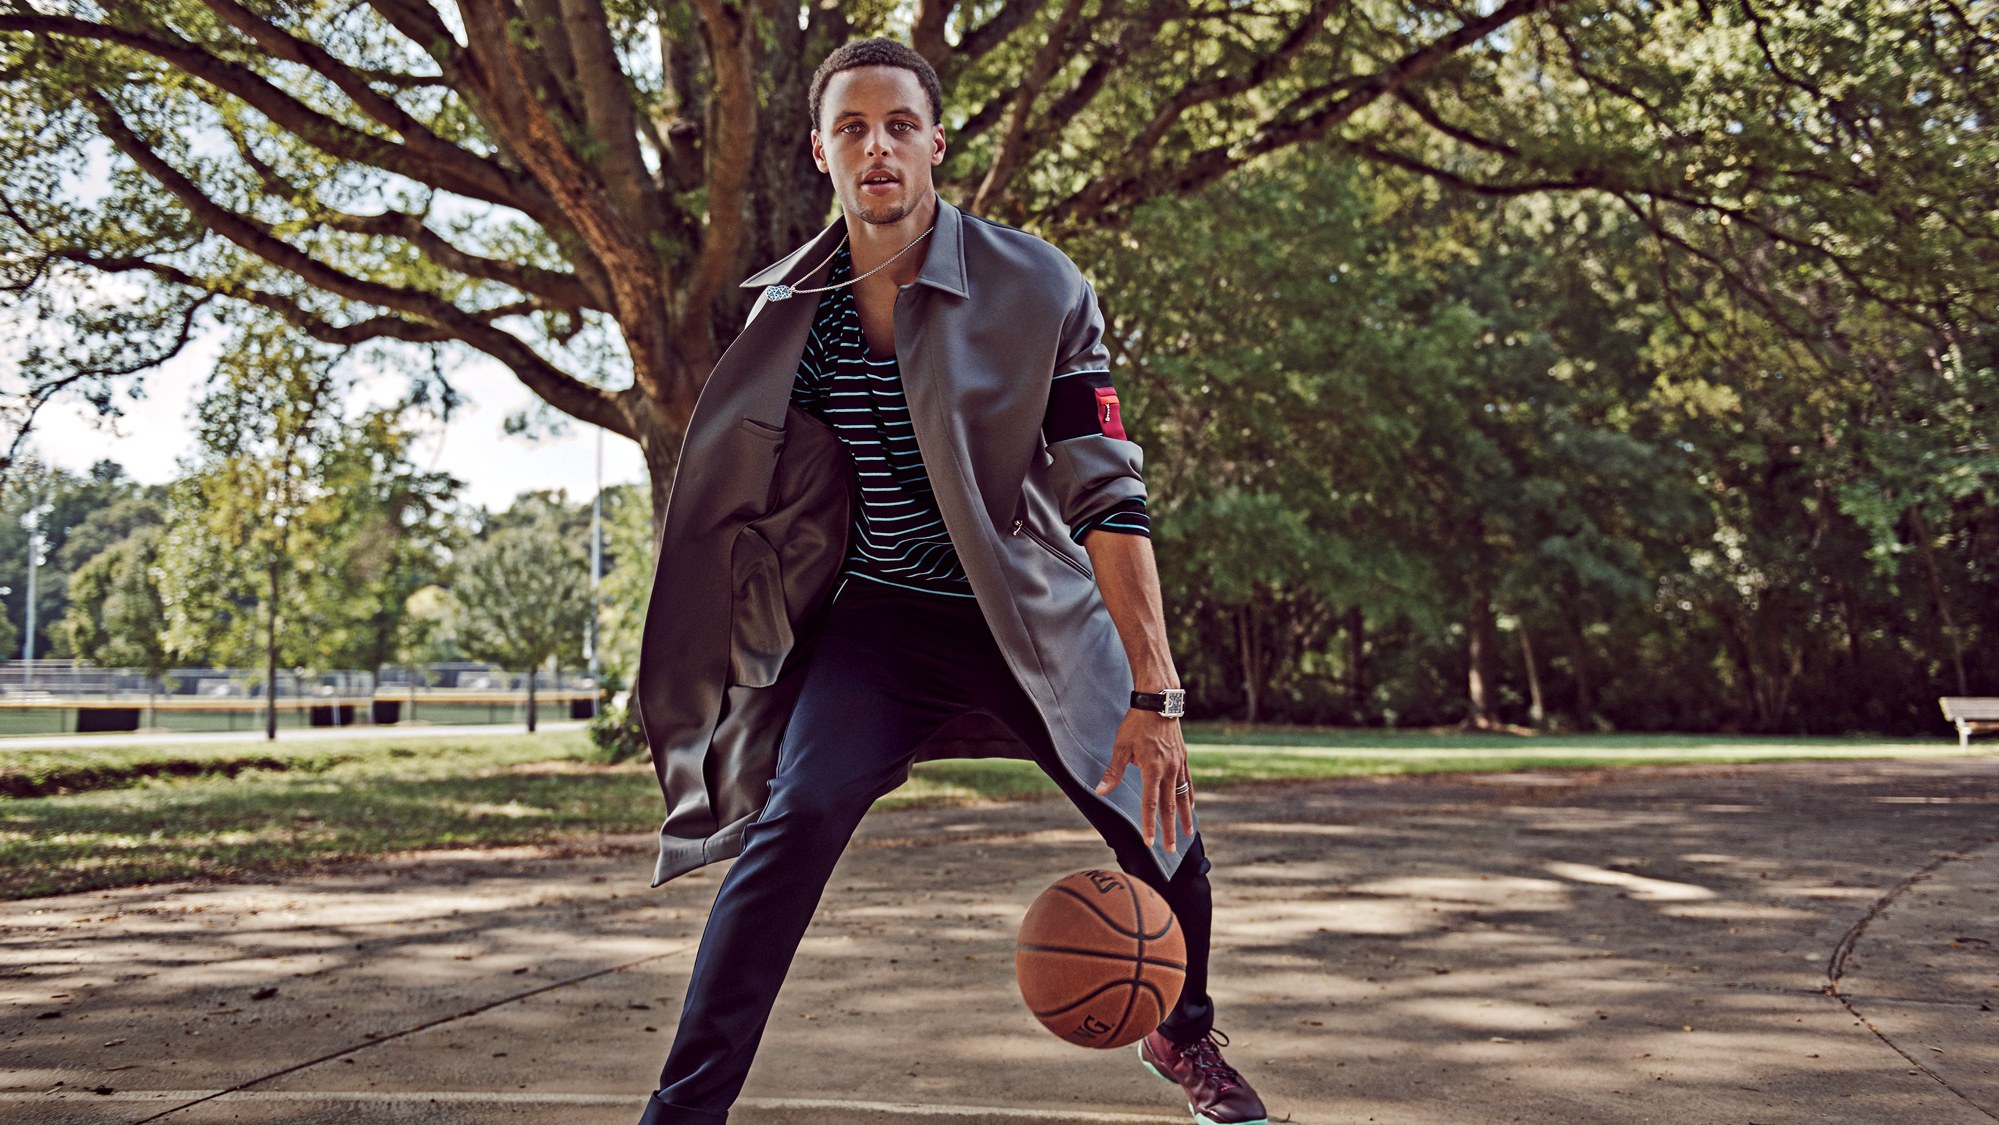 Steph Curry Dribbling Lifestyle Photography from K2 Productions